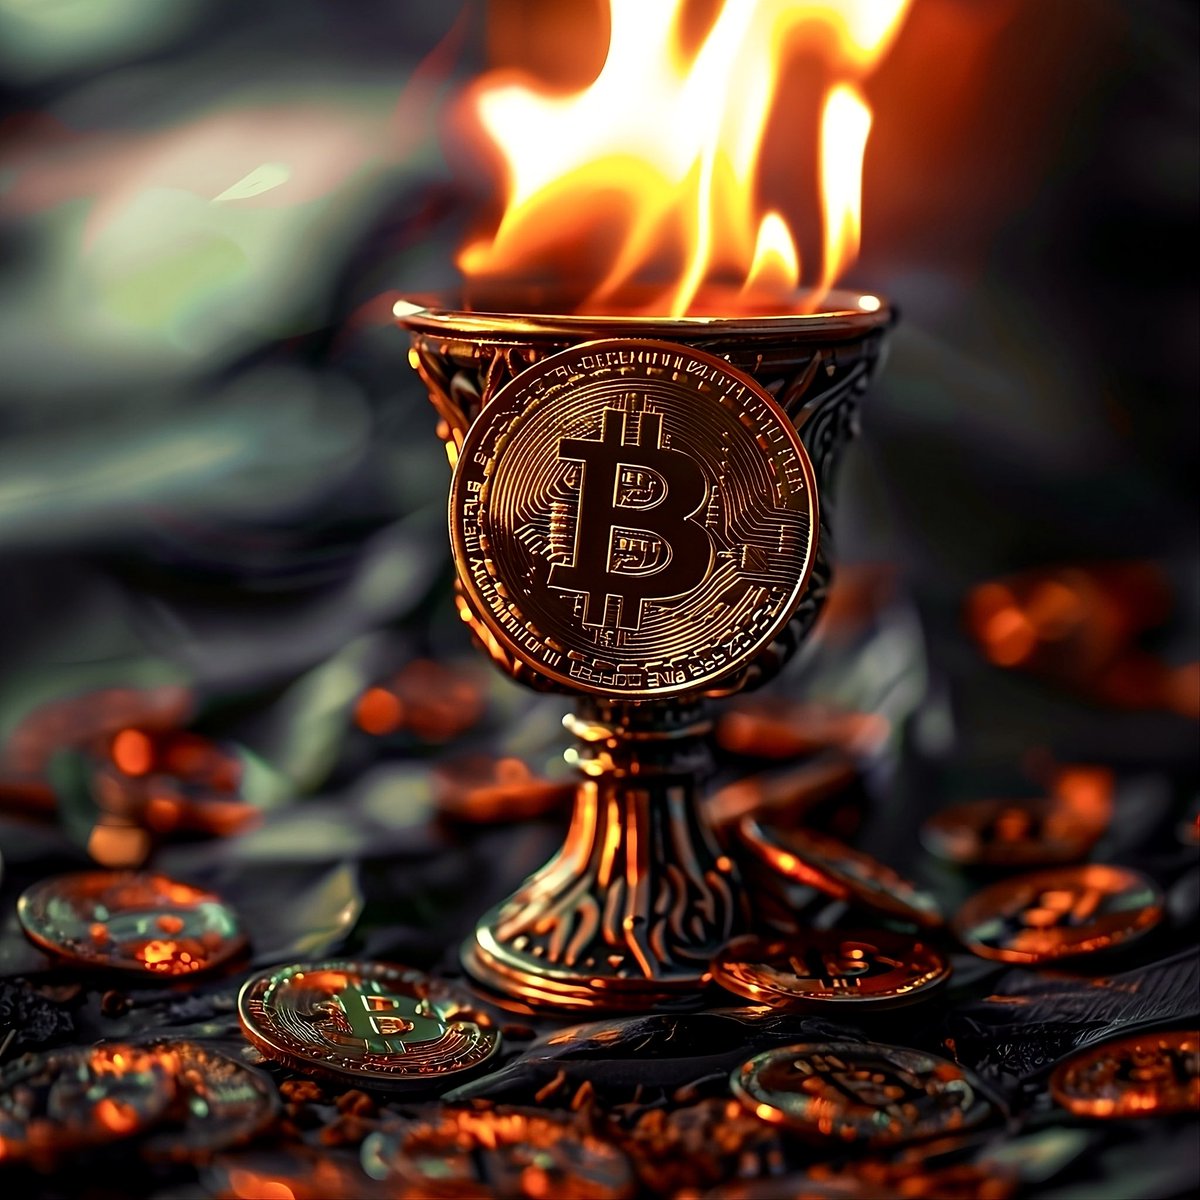 “You don’t need everybody. You need the Maximalists. The keepers of the flame. The 1% who are willing to fight and die for their principles. #Bitcoin” -@saylor